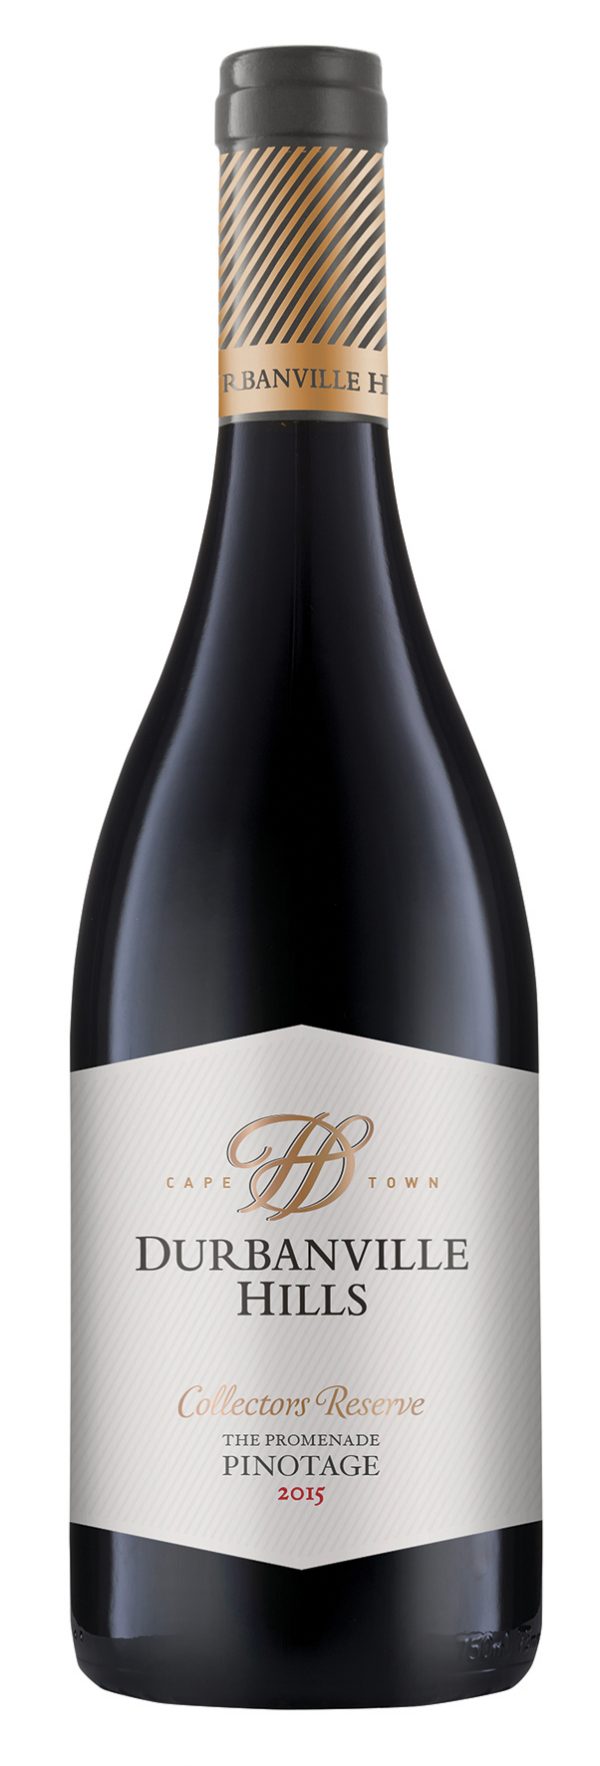 Collector’s Reserve The Promenade Pinotage